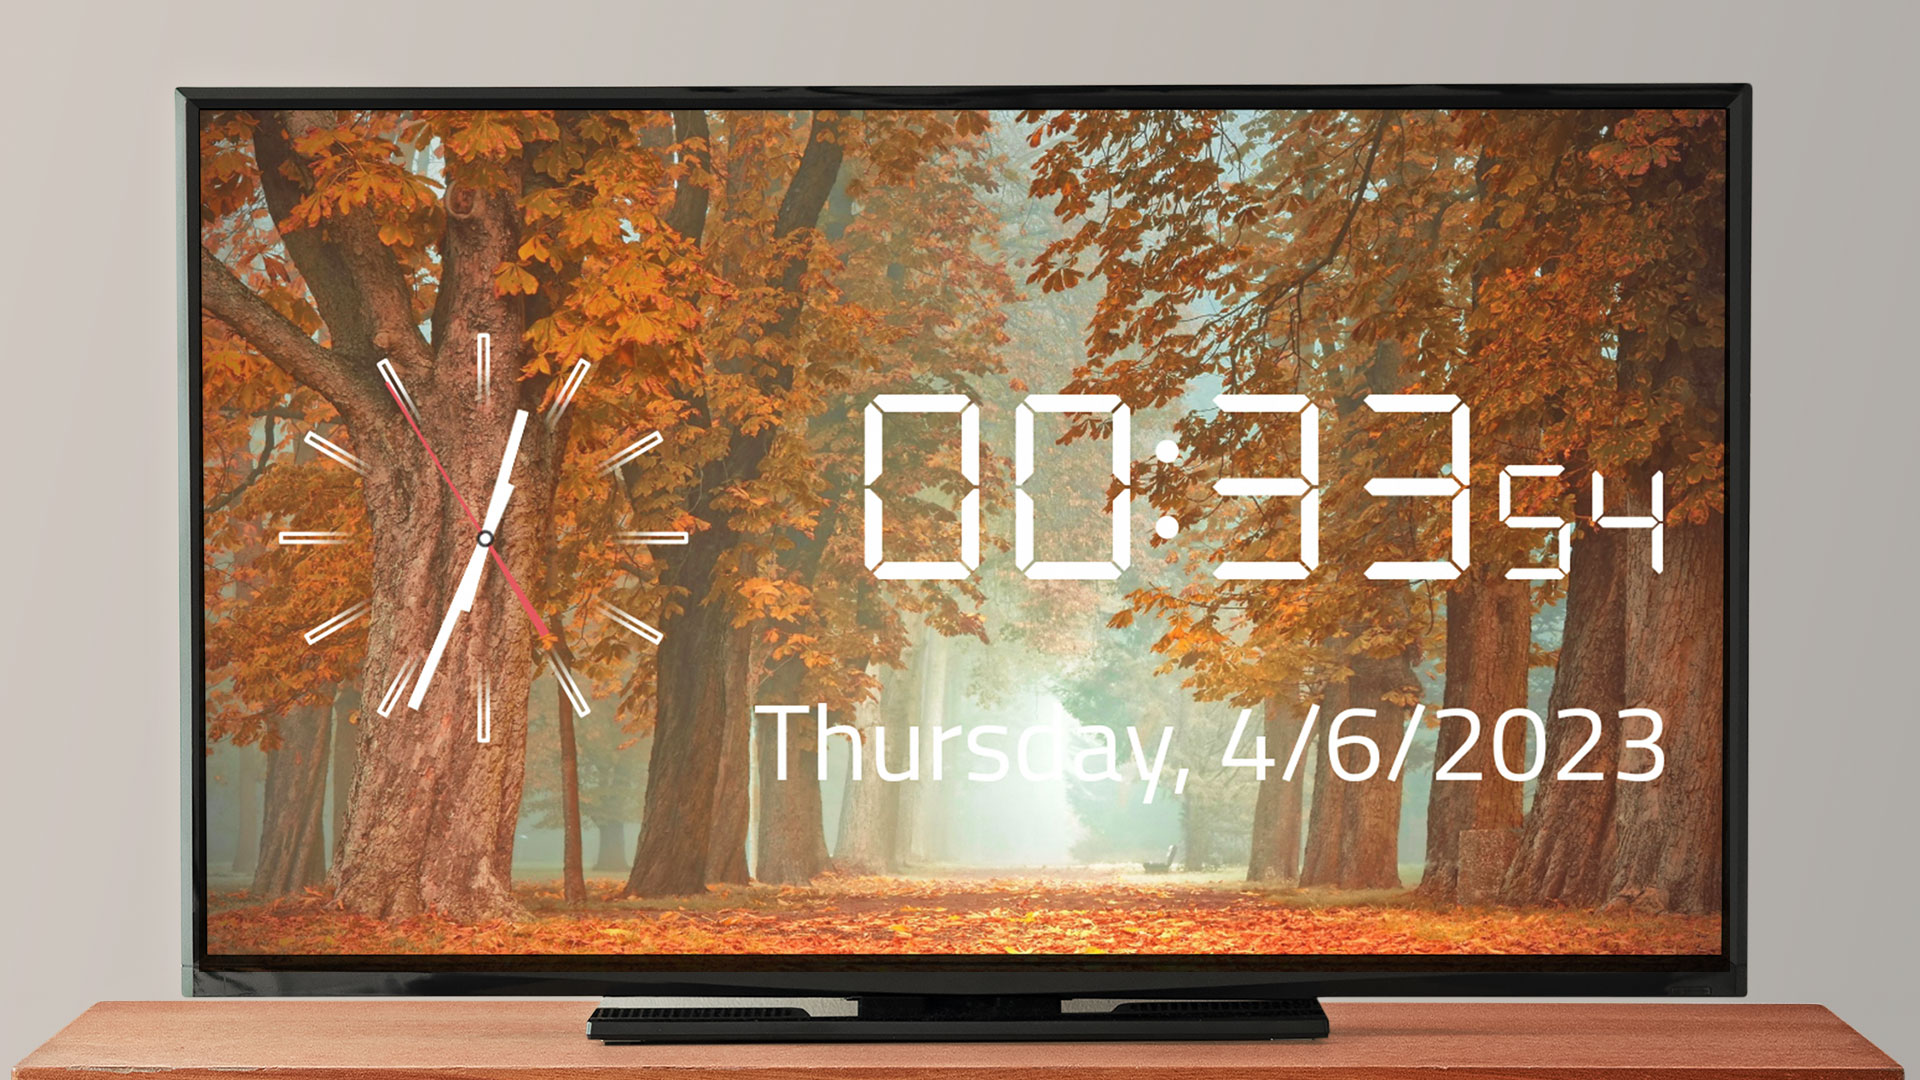 Autumn Ambience Clock HD: Analog And Digital Clock Screensaver For Tablets And Fire TV - NO ADS